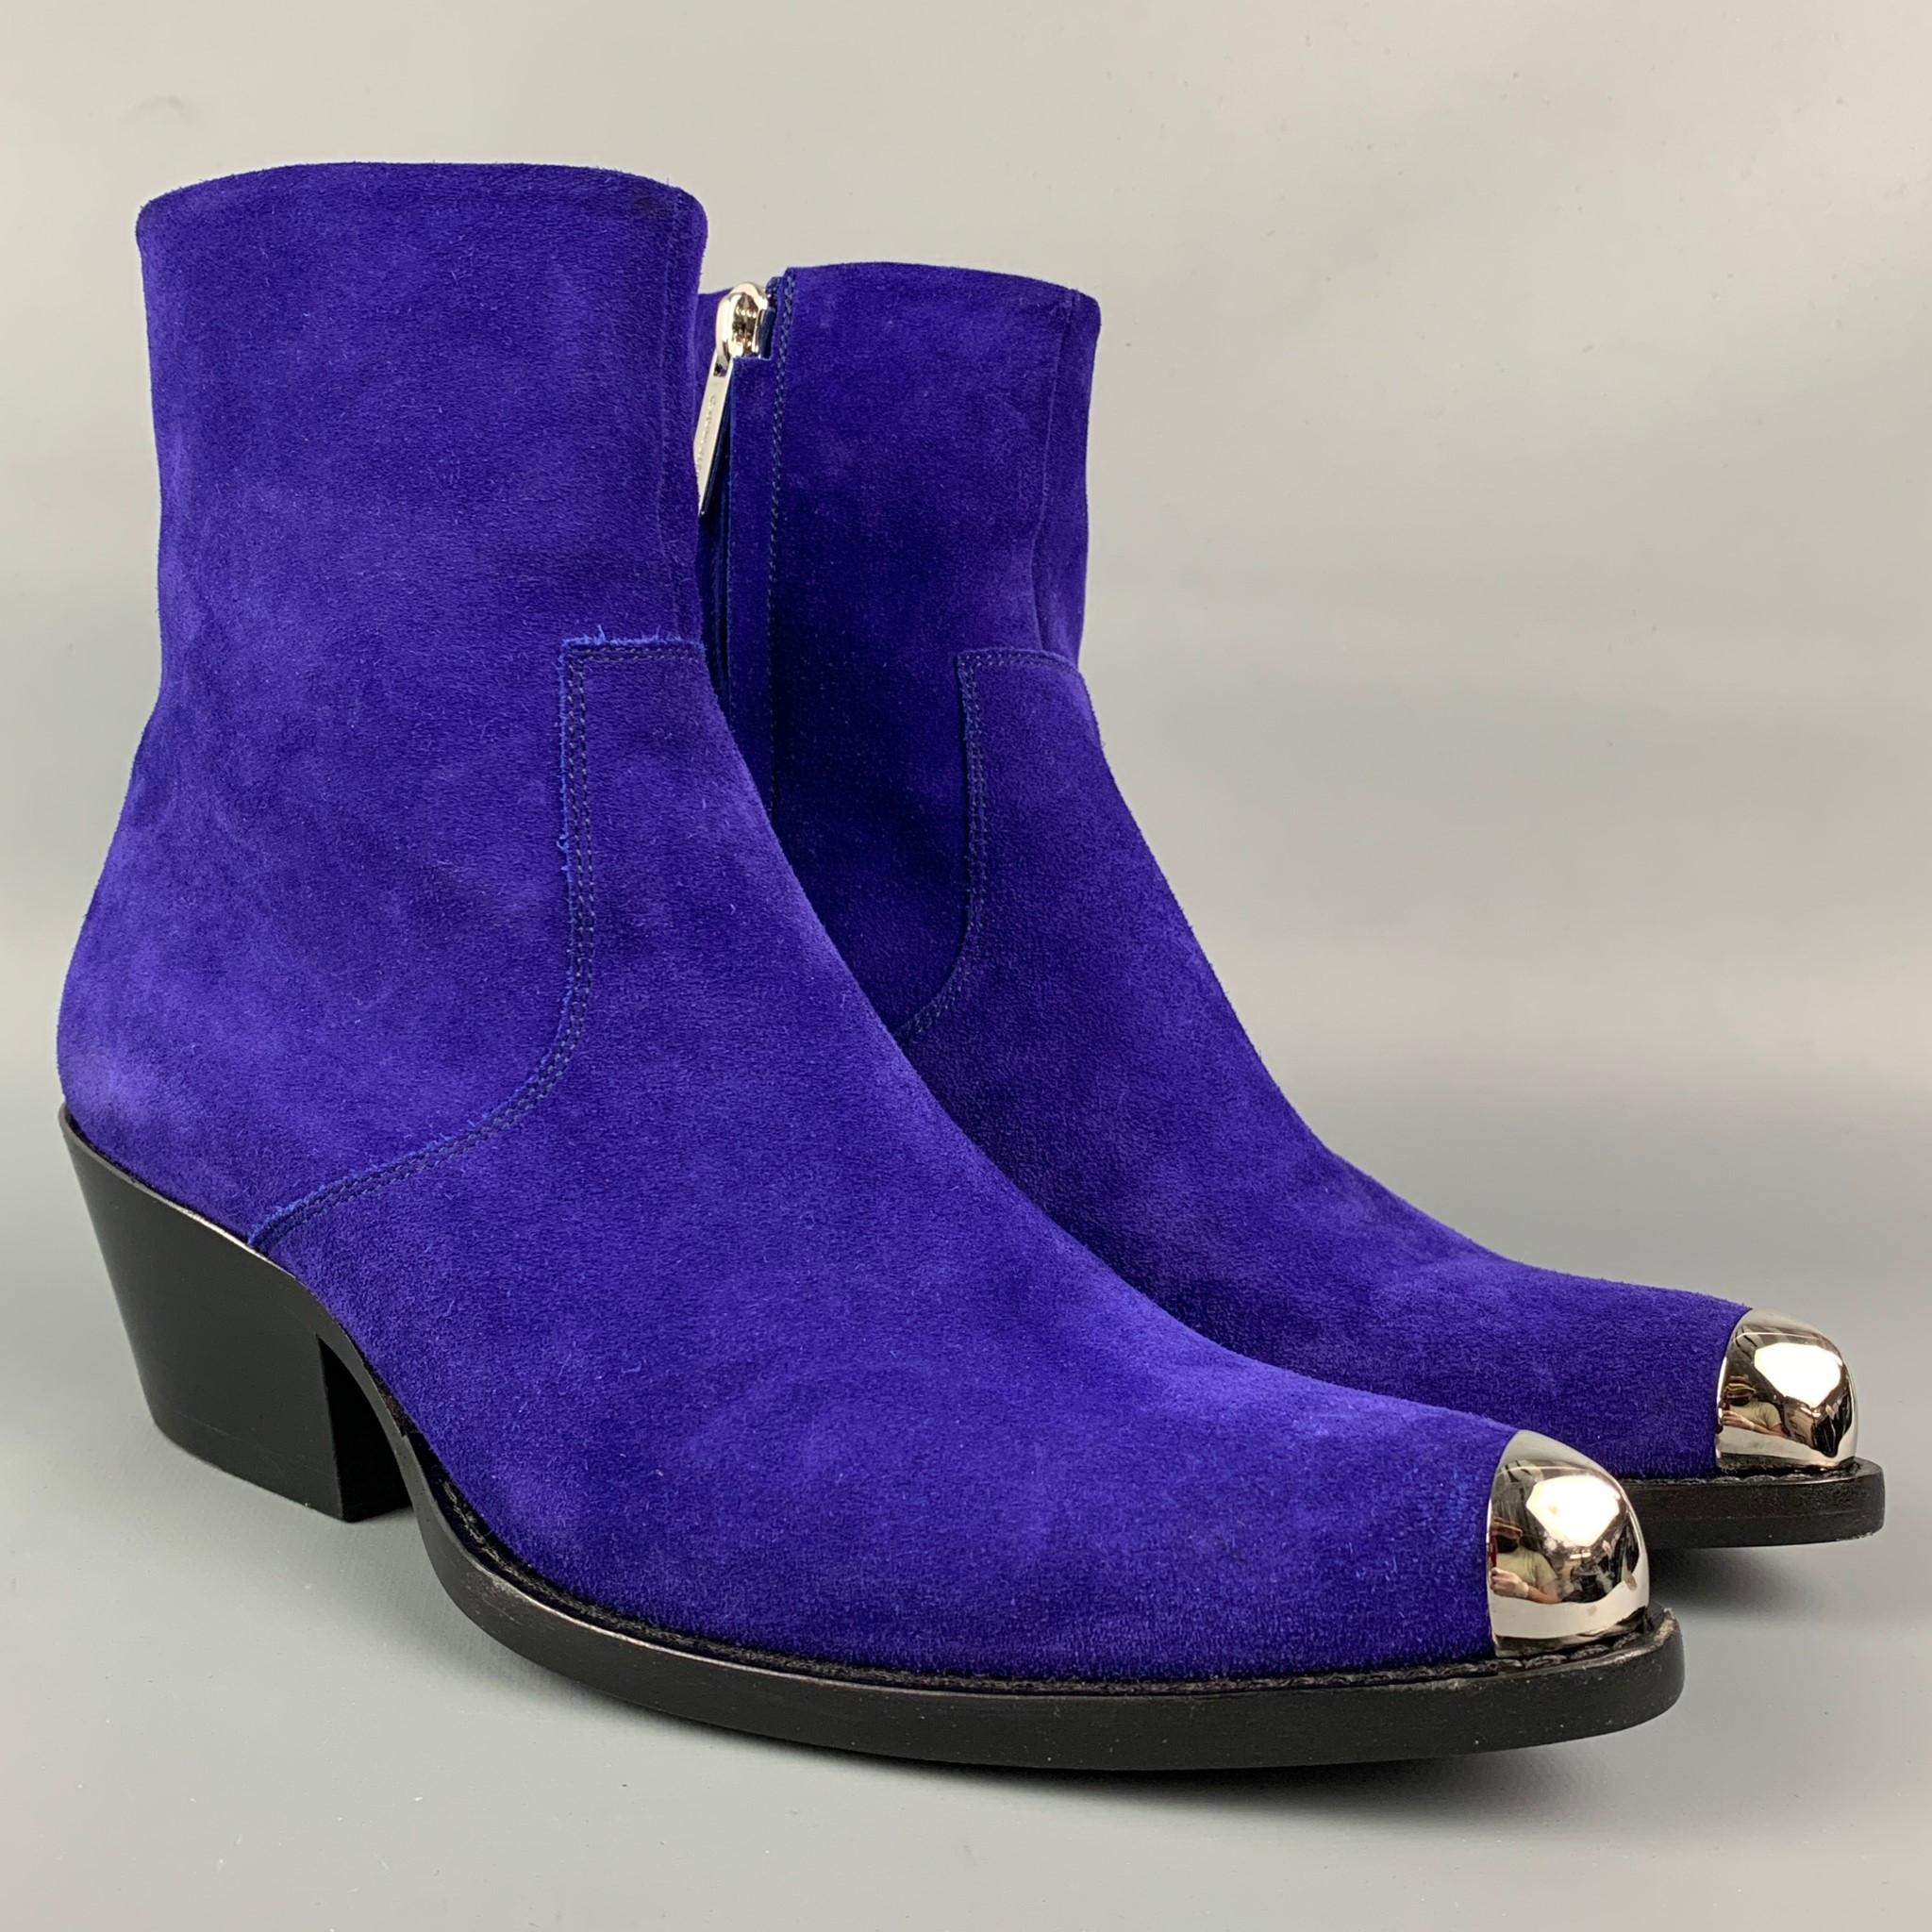 CALVIN KLEIN 205W39NYC ankle boots comes in a purple suede featuring a silver tone pointed toe, cuban heel, and a side zipper closure. Includes box. Made in Italy.

Very Good Pre-Owned Condition.
Marked: 36.5

Measurements:

Length: 10 in.
Width: